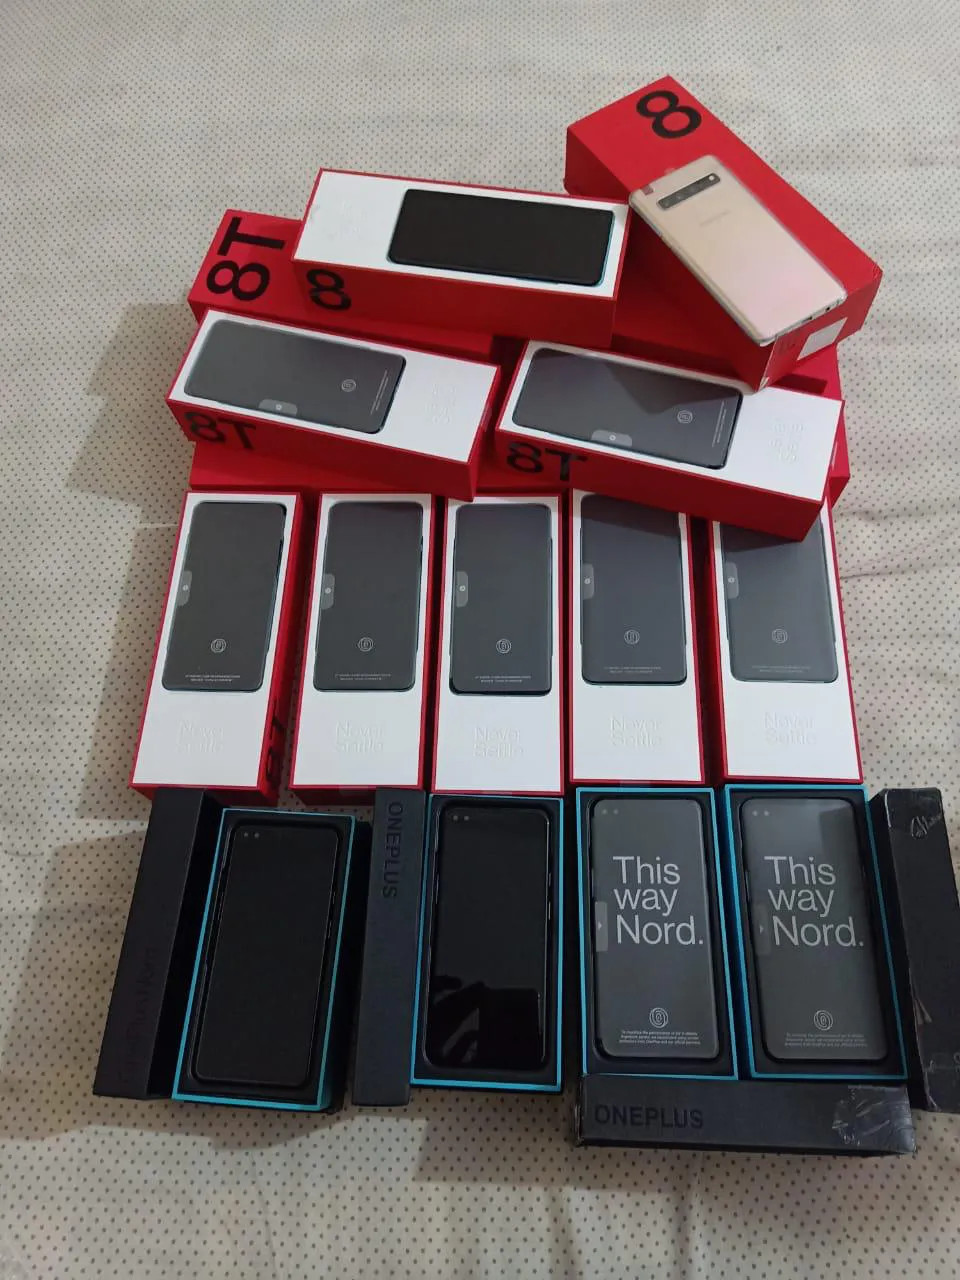 OnePlus all models - photo 1